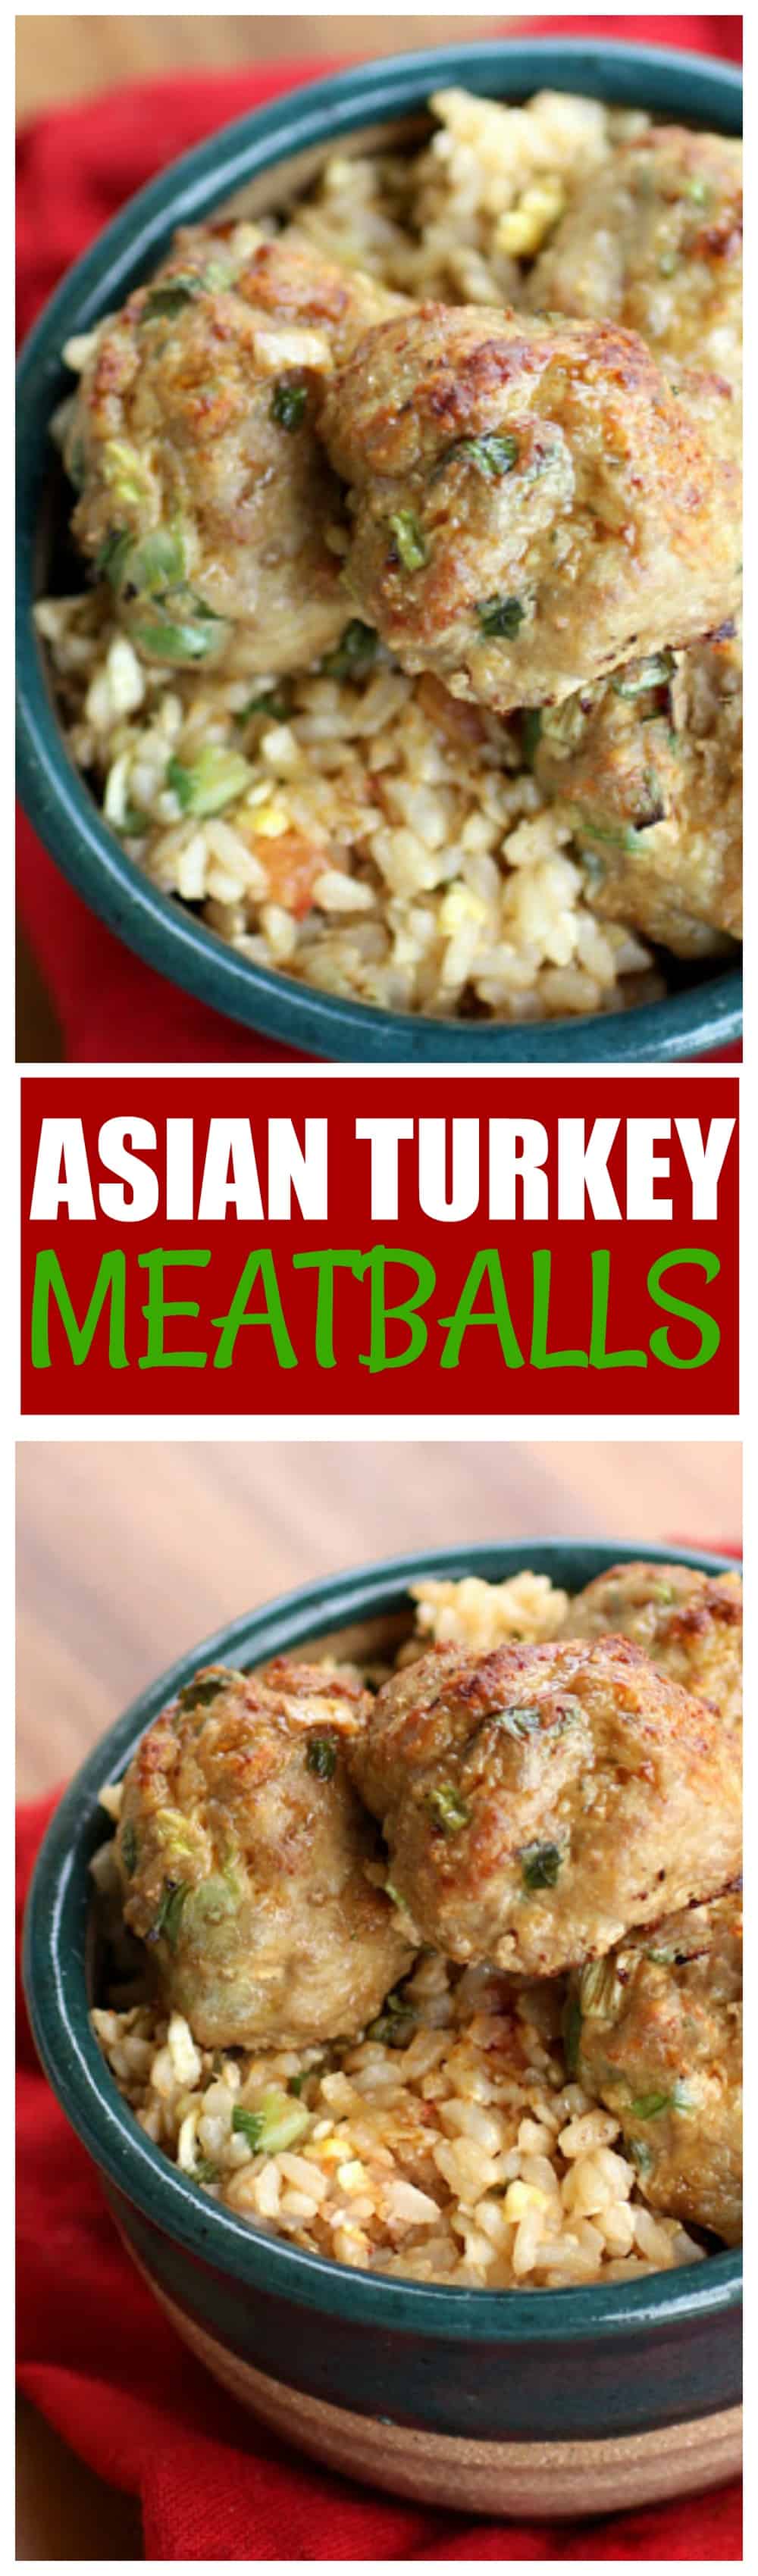 These Asian Turkey Meatballs are a healthy and easy recipe. Add some lime dipping sauce and you have a killer dinner! #healthy #turkey #meatballs #recipe